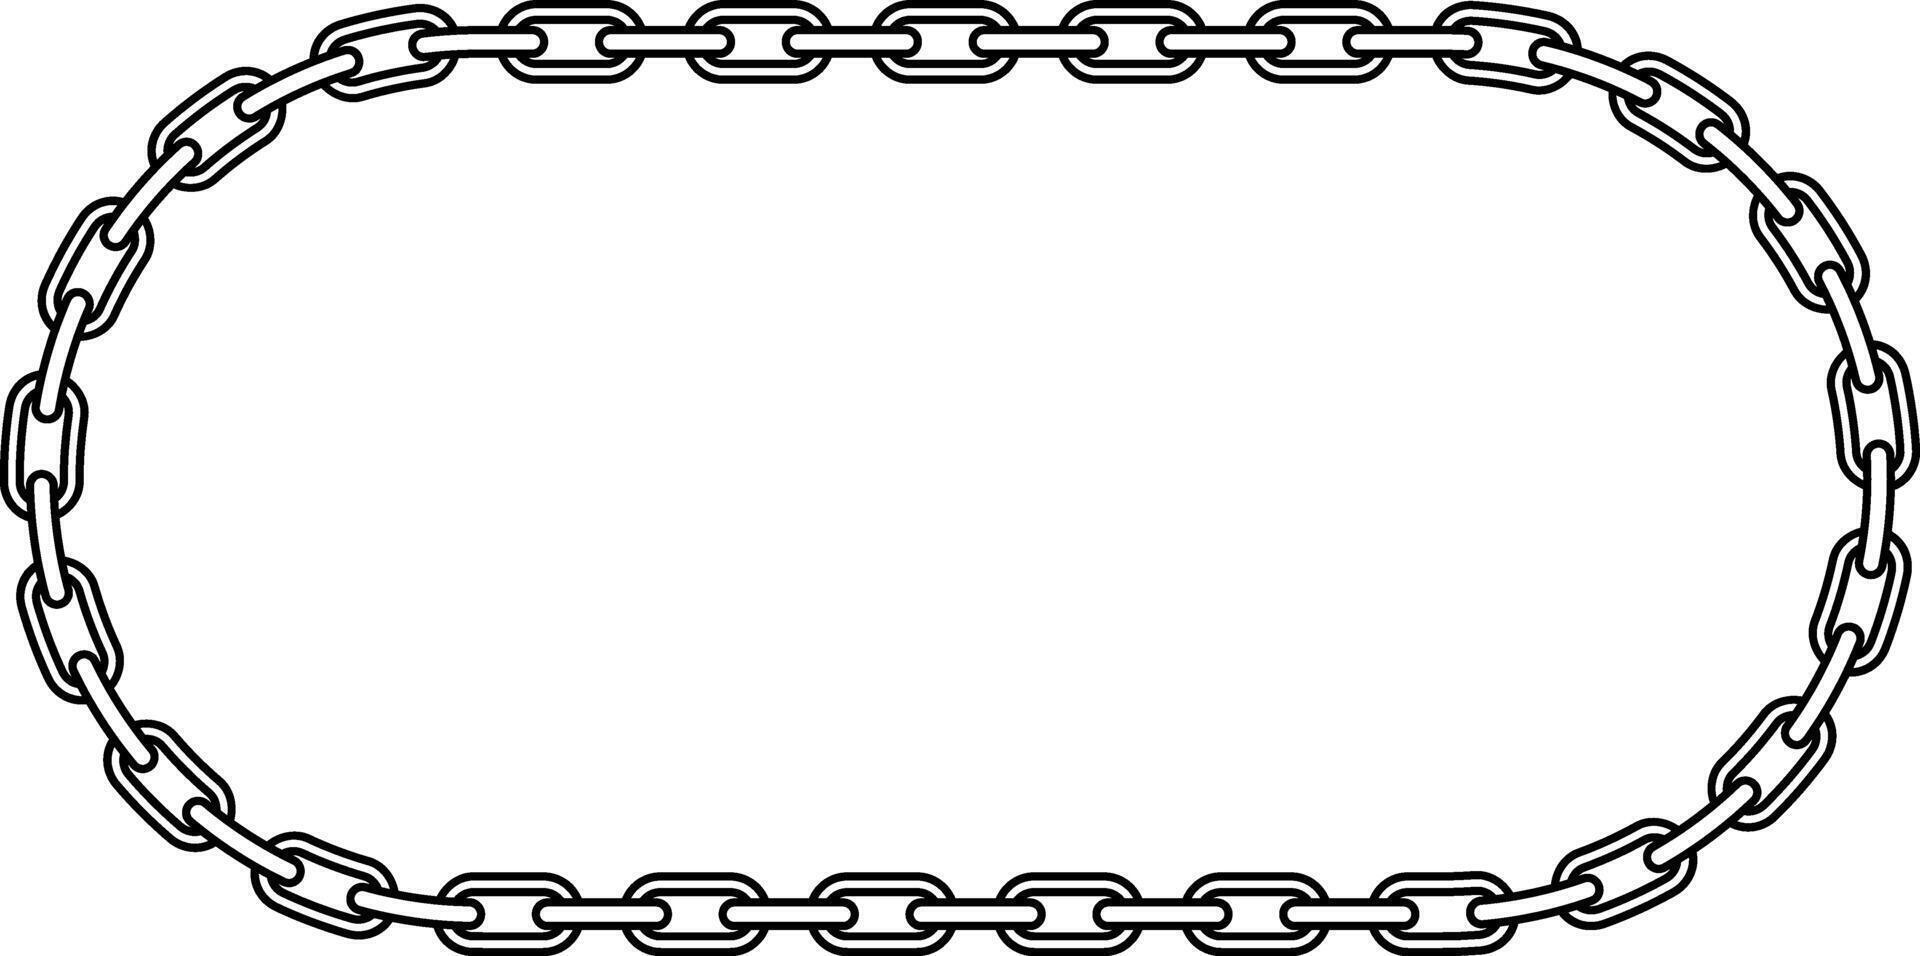 rounded chain frame with copy space for text or design vector